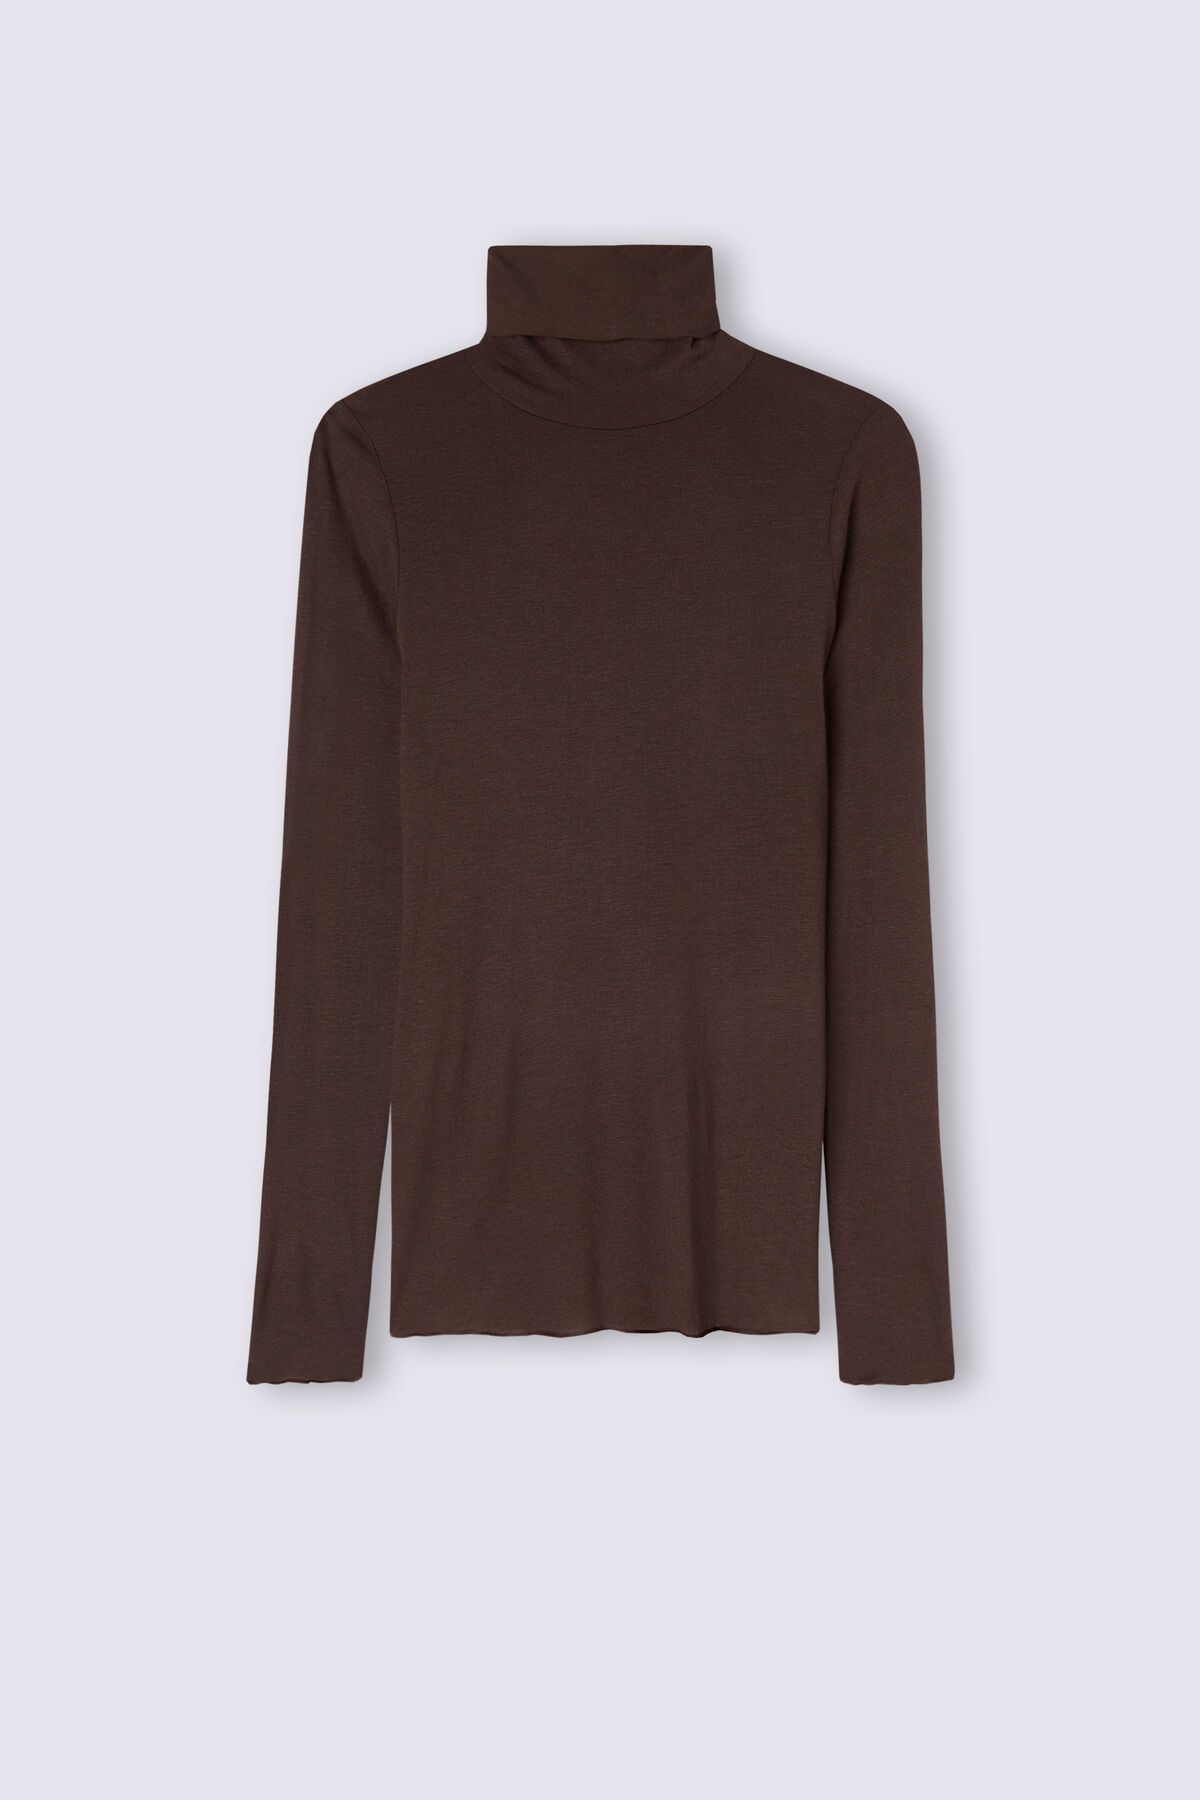 Turtleneck Top in Modal Light with Cashmere Lamé | Intimissimi (US)